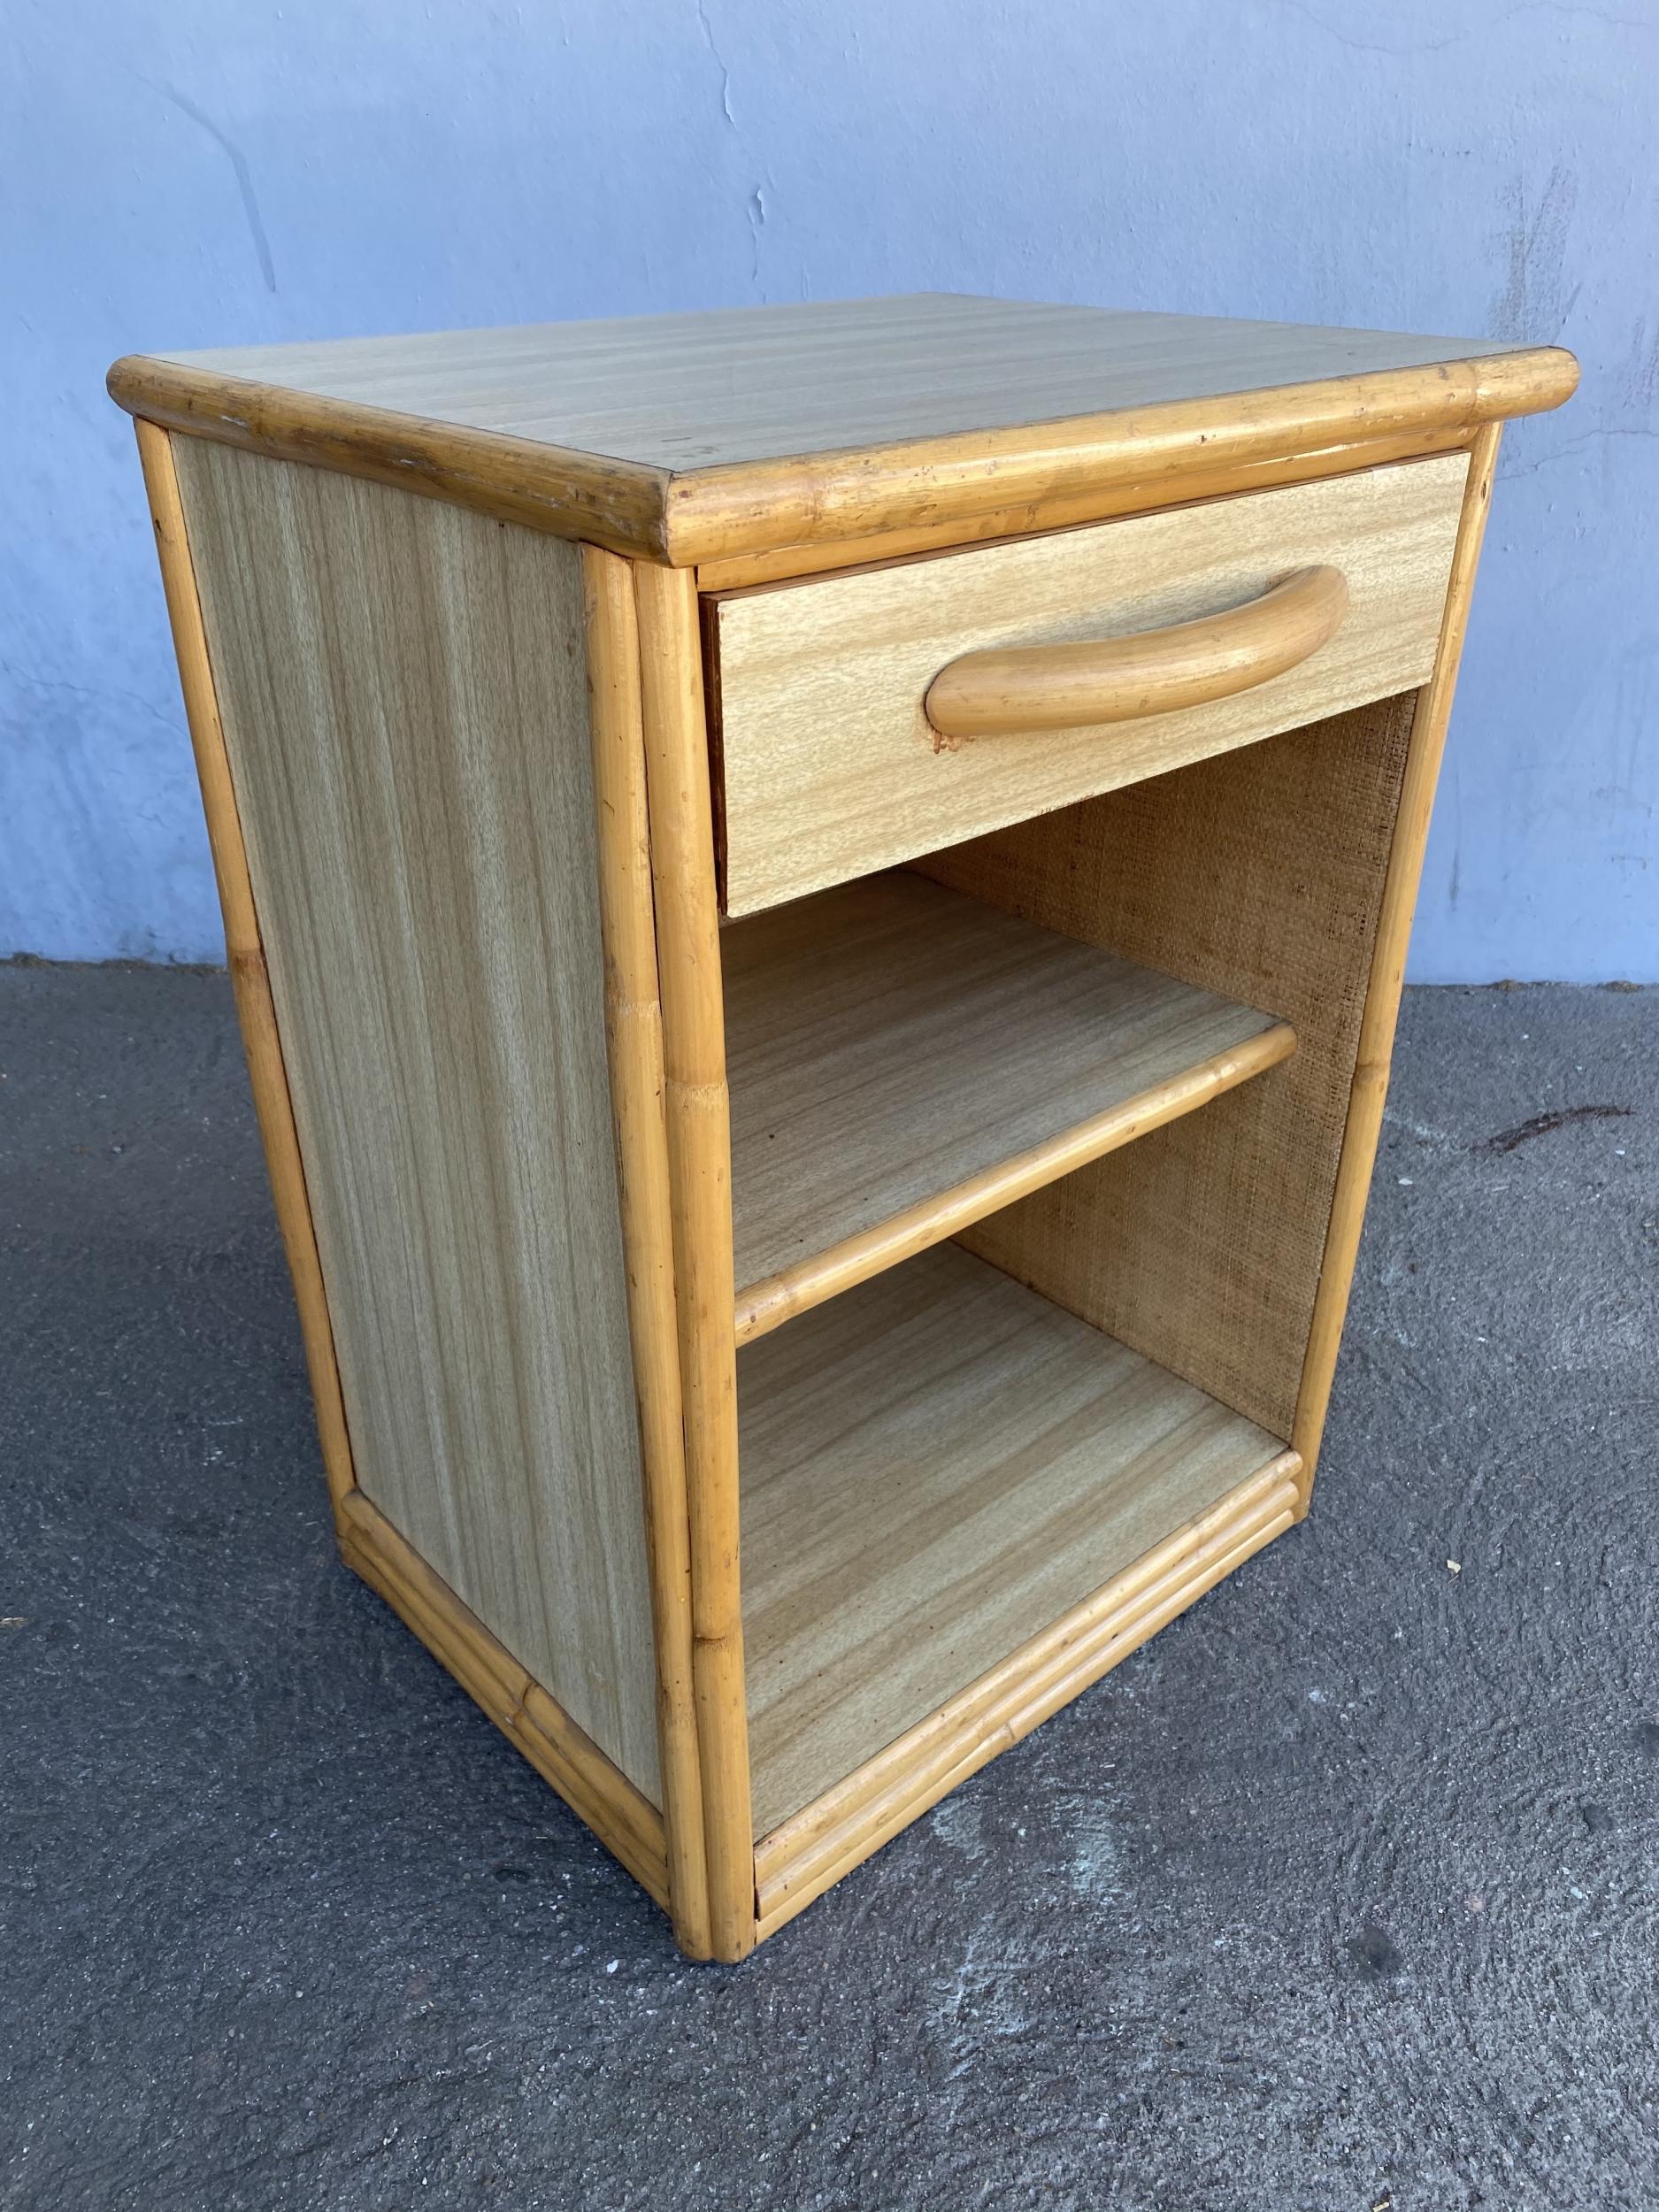 Original 1950s Formica and rattan nightstand with a rattan border, Formica sides, and top with a steam-bent rattan pull handle.

Designed in the manner of Paul Frankl.

Restored to new for you.

All rattan, bamboo and wicker furniture has been